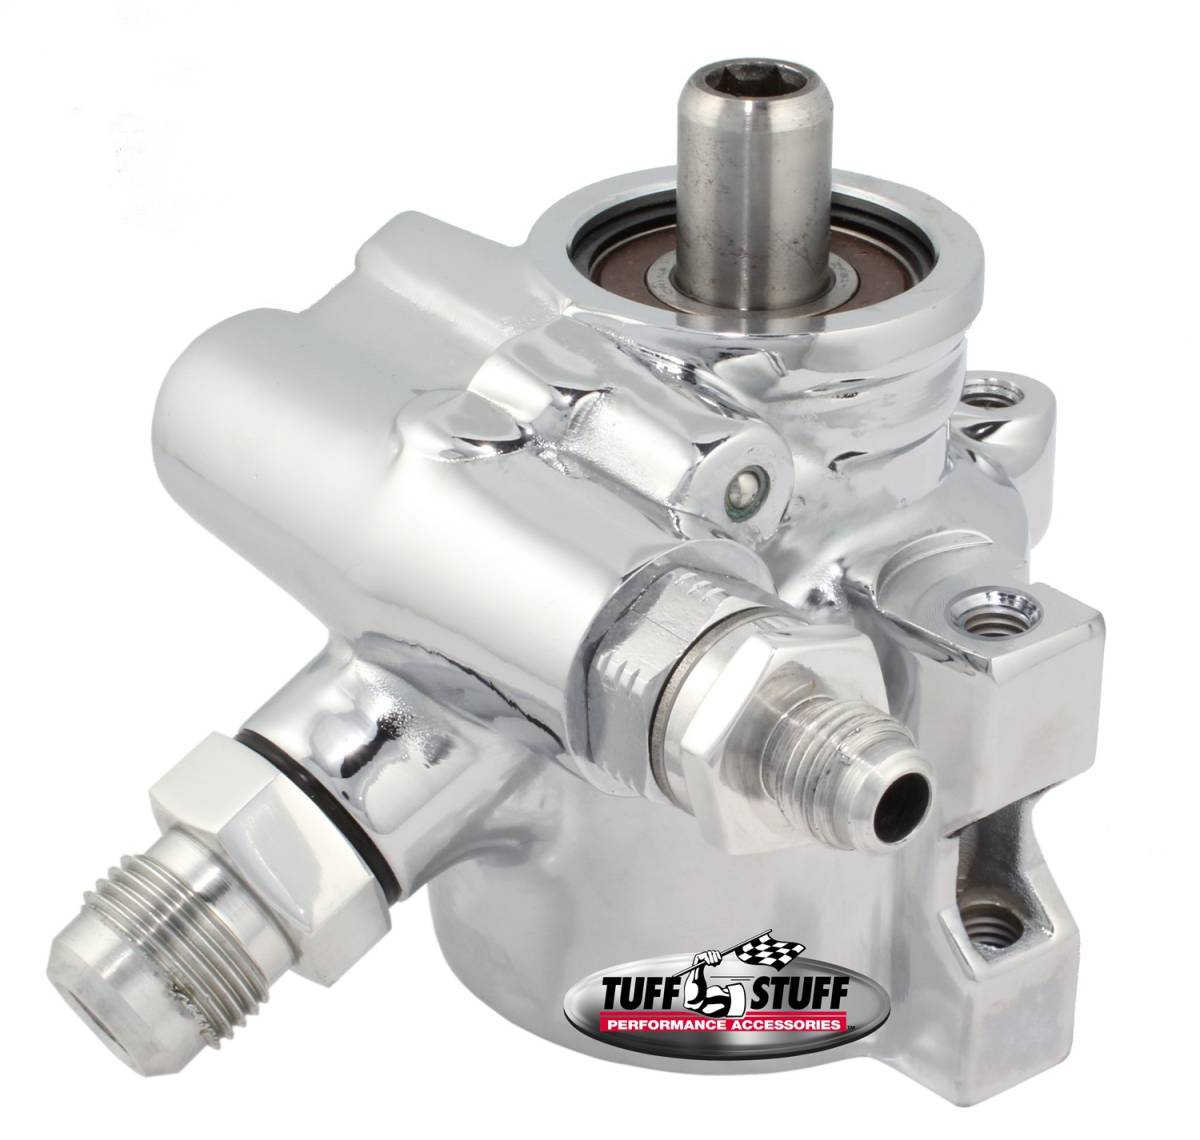 Tuff Stuff Performance - Type II Alum. Power Steering Pump An-6 And AN-10 Fittings M8x1.25 Threaded Hole Mounting Aluminum For Street Rods/Custom Vehicles w/Limited Engine Space Polished 6175ALP-2